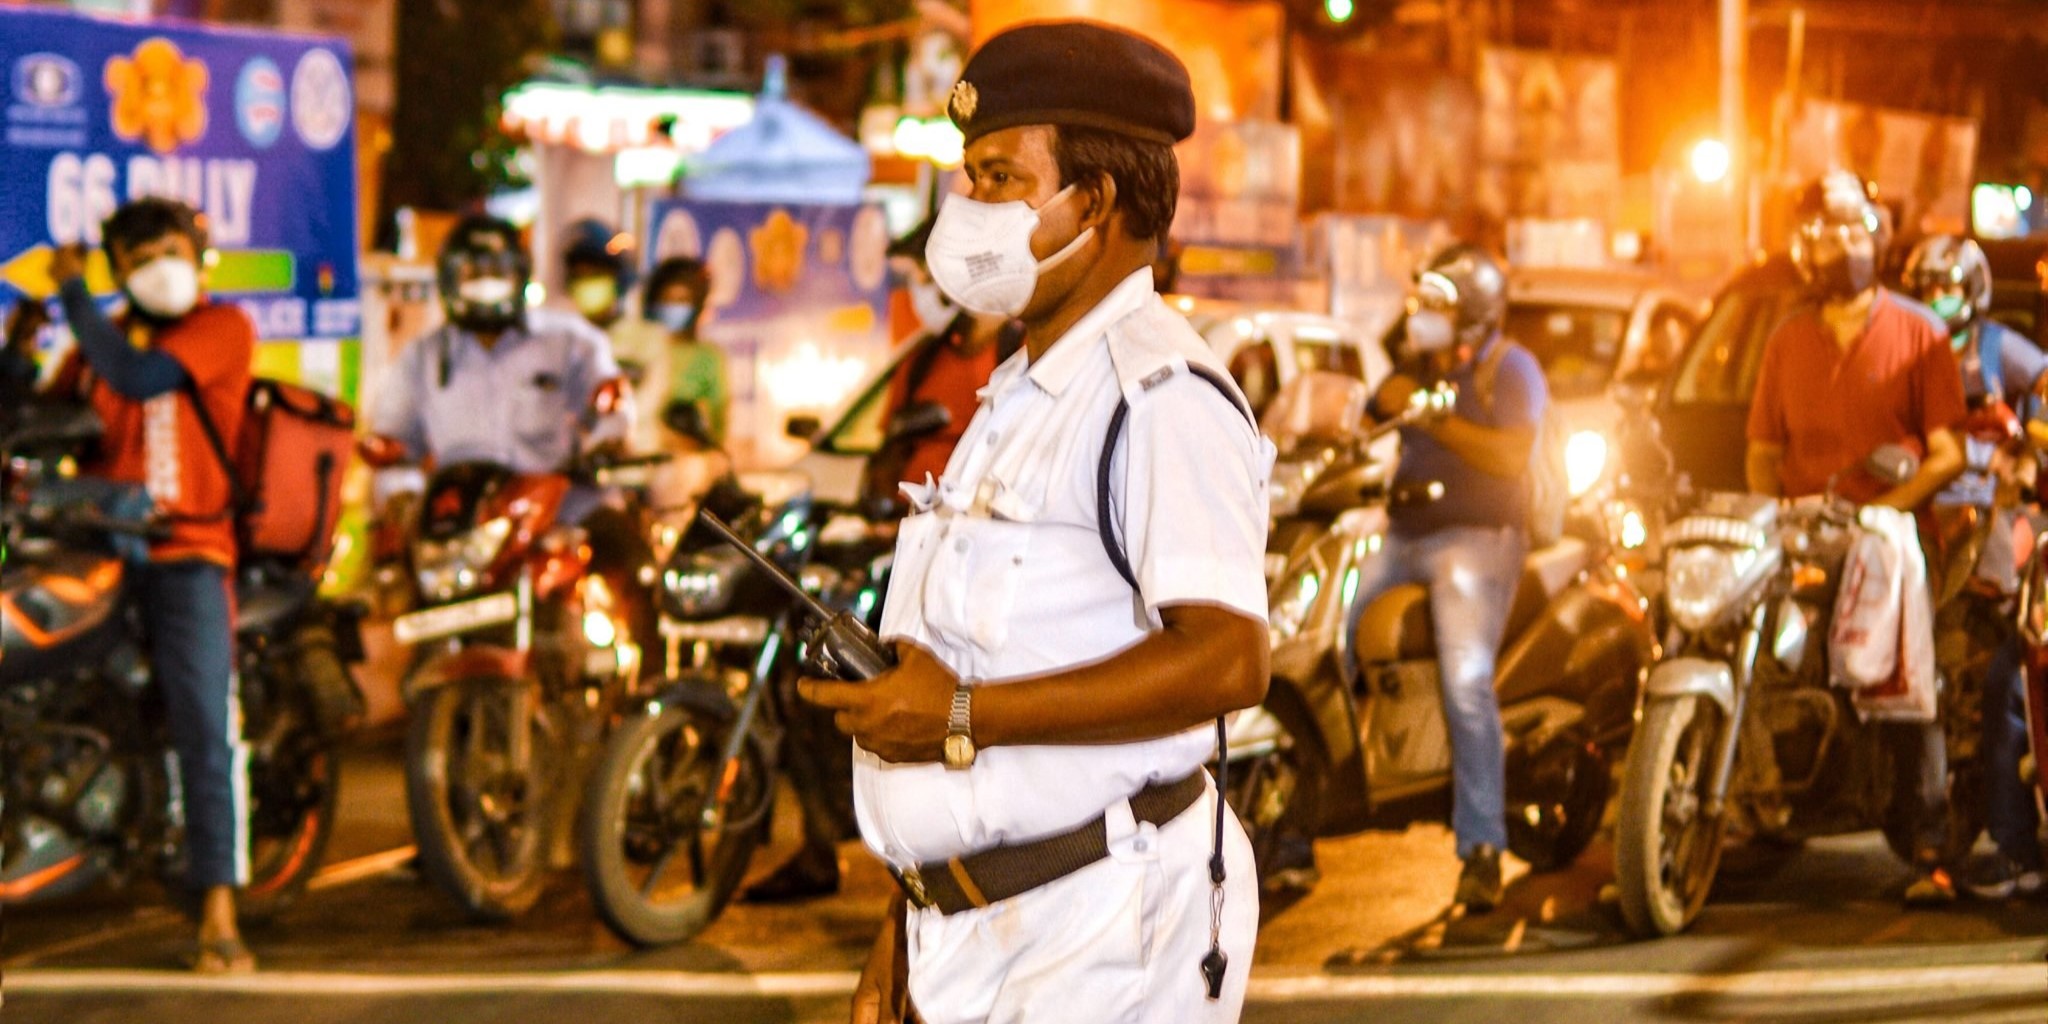 A cop on duty in Bengaluru. (Creative Commons)